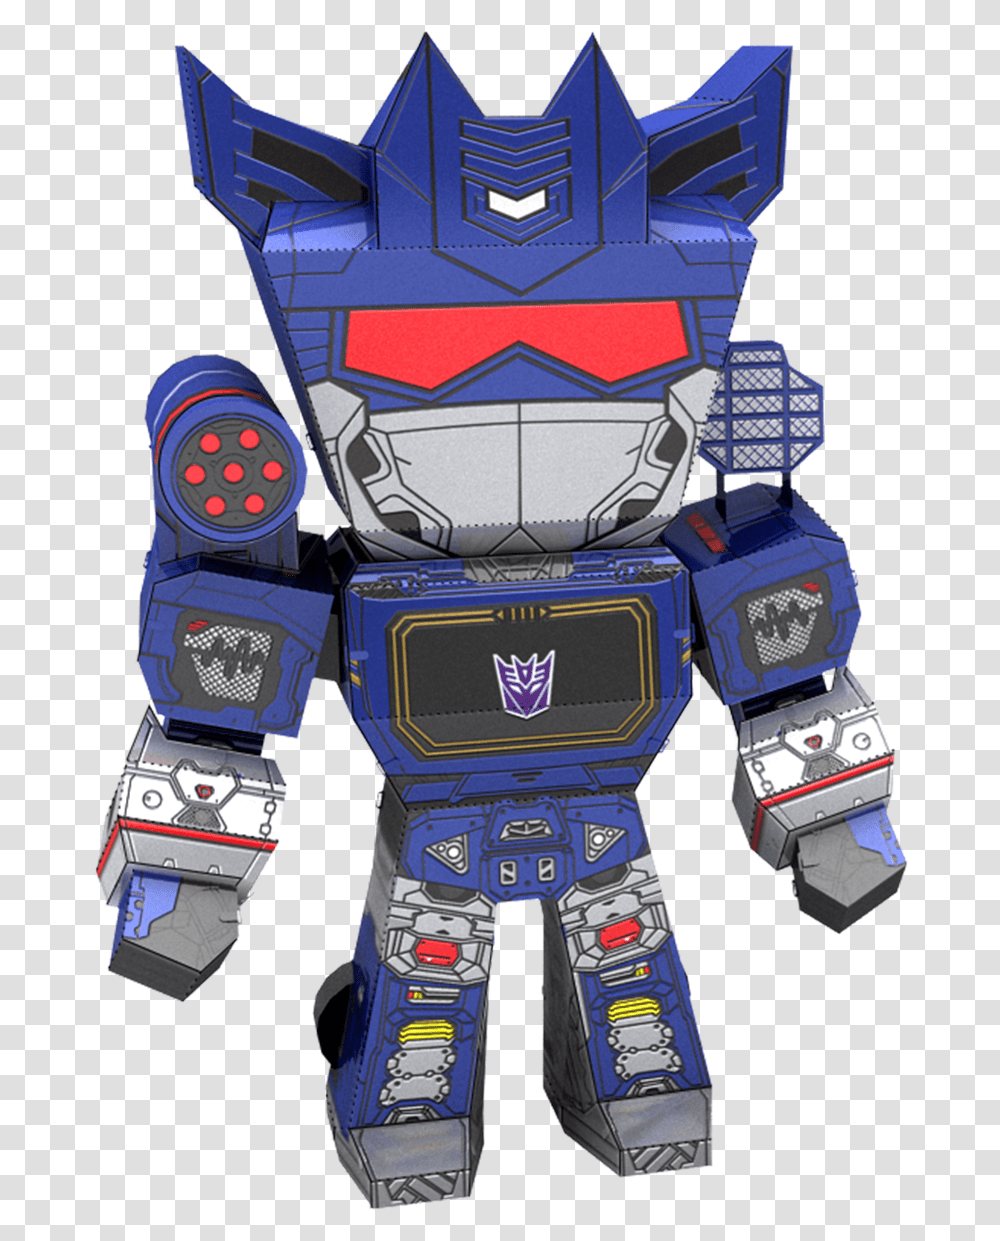 Transformers Metal Earth Legends, Robot, Toy, Machine Transparent Png